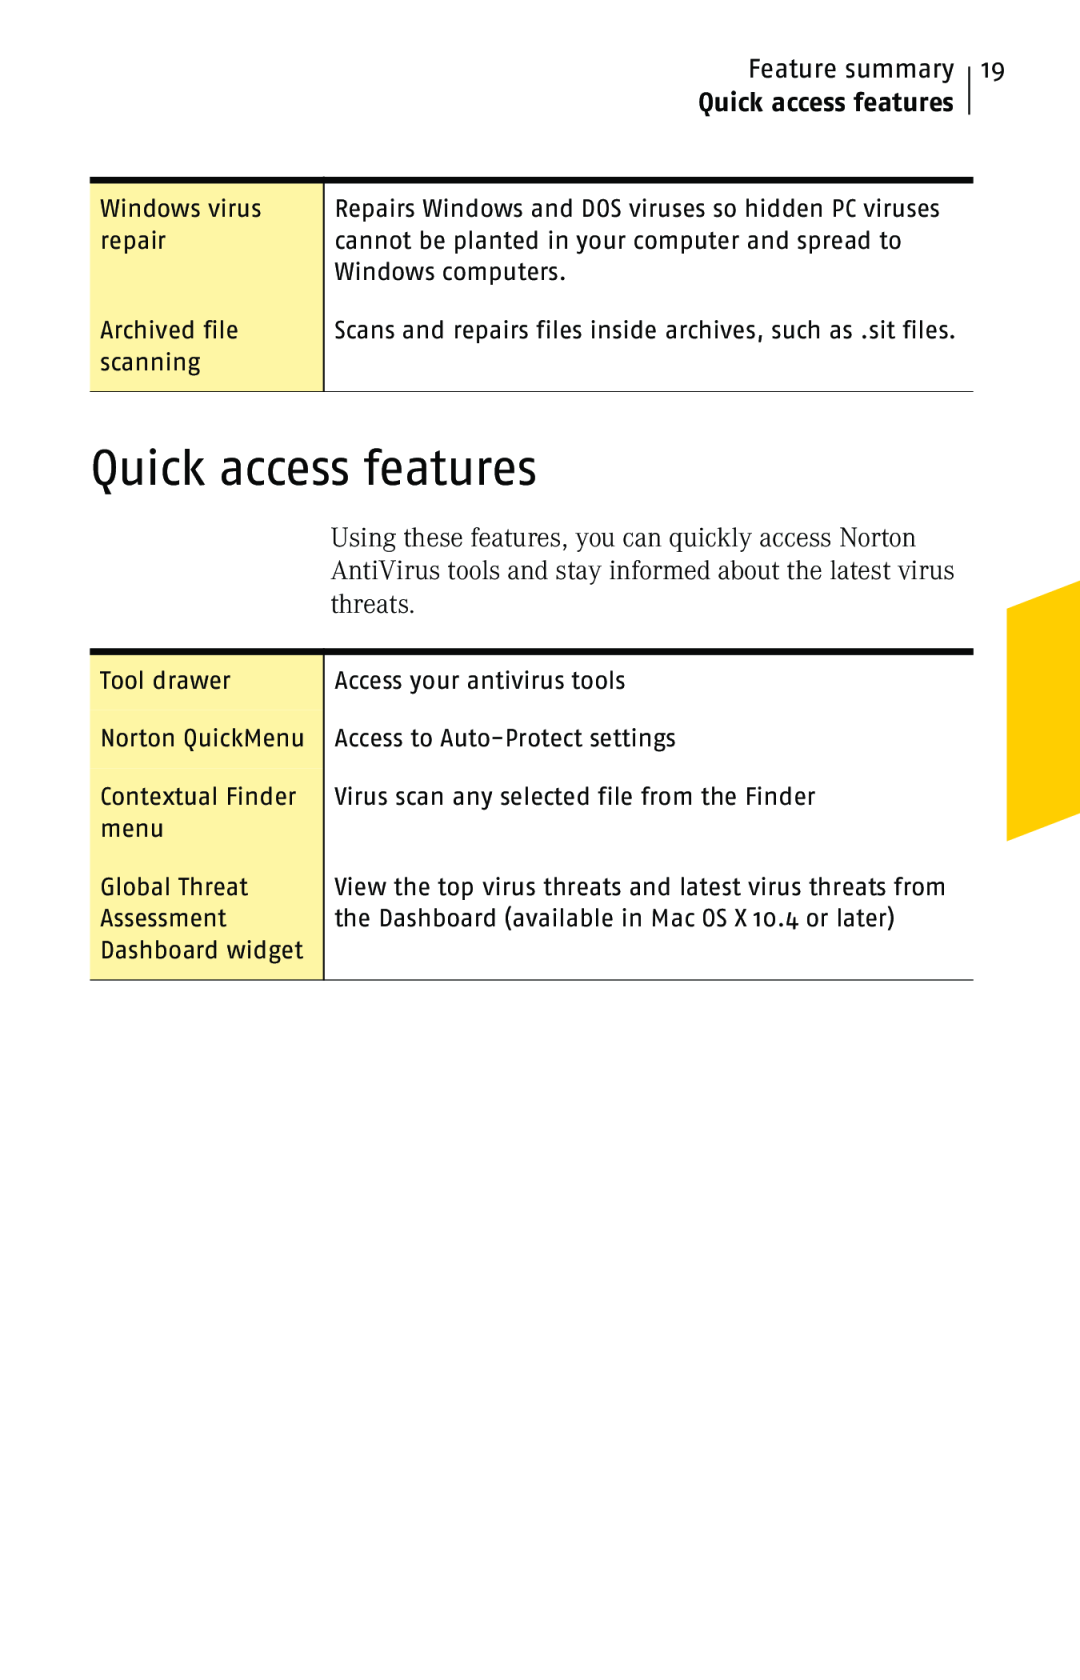 Symantec 10 manual Quick access features, Feature summary 